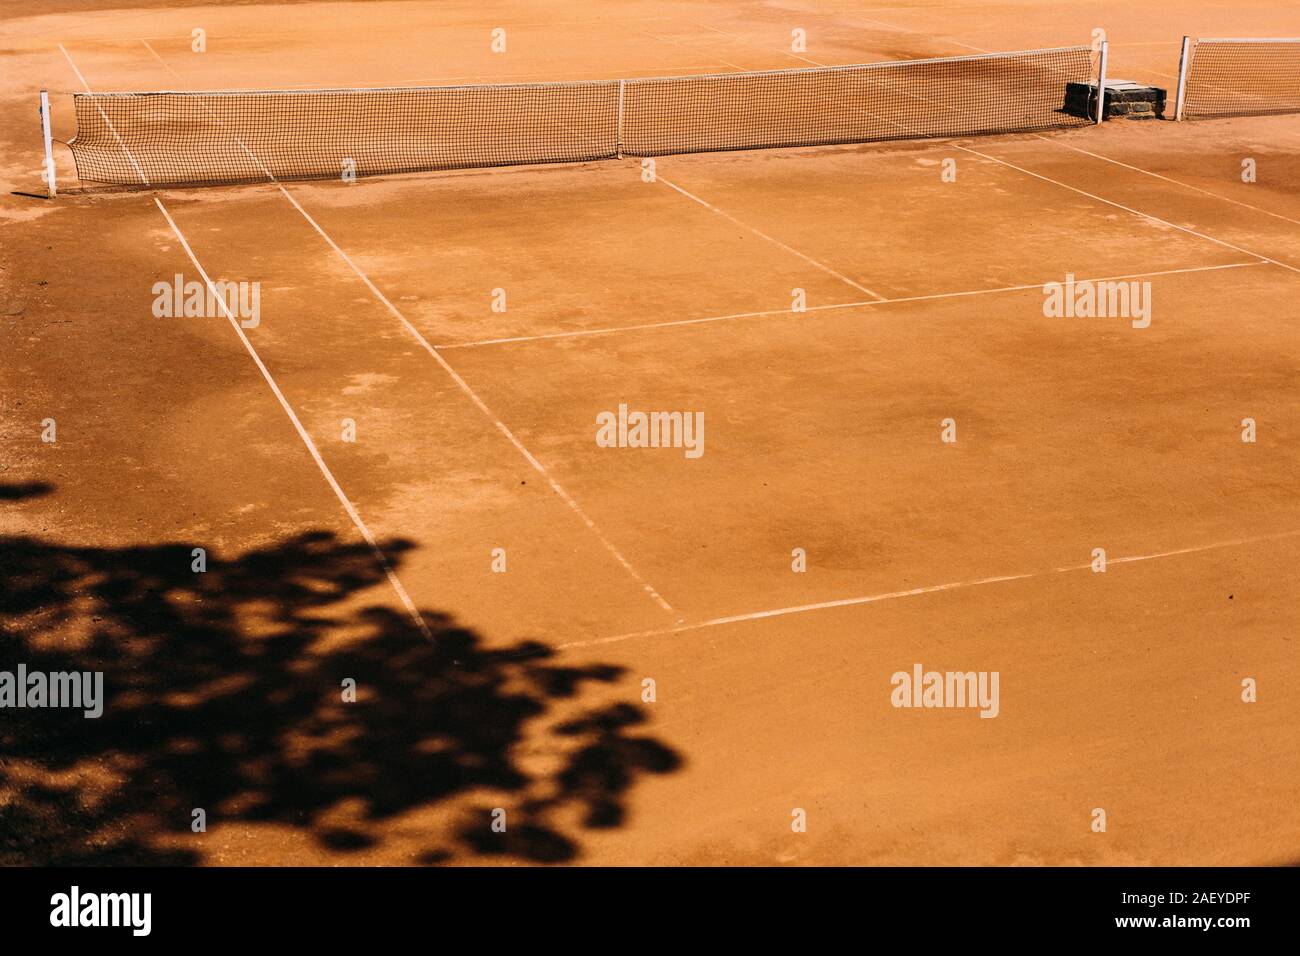 Old orange tennis court with shadow of a tree Stock Photo